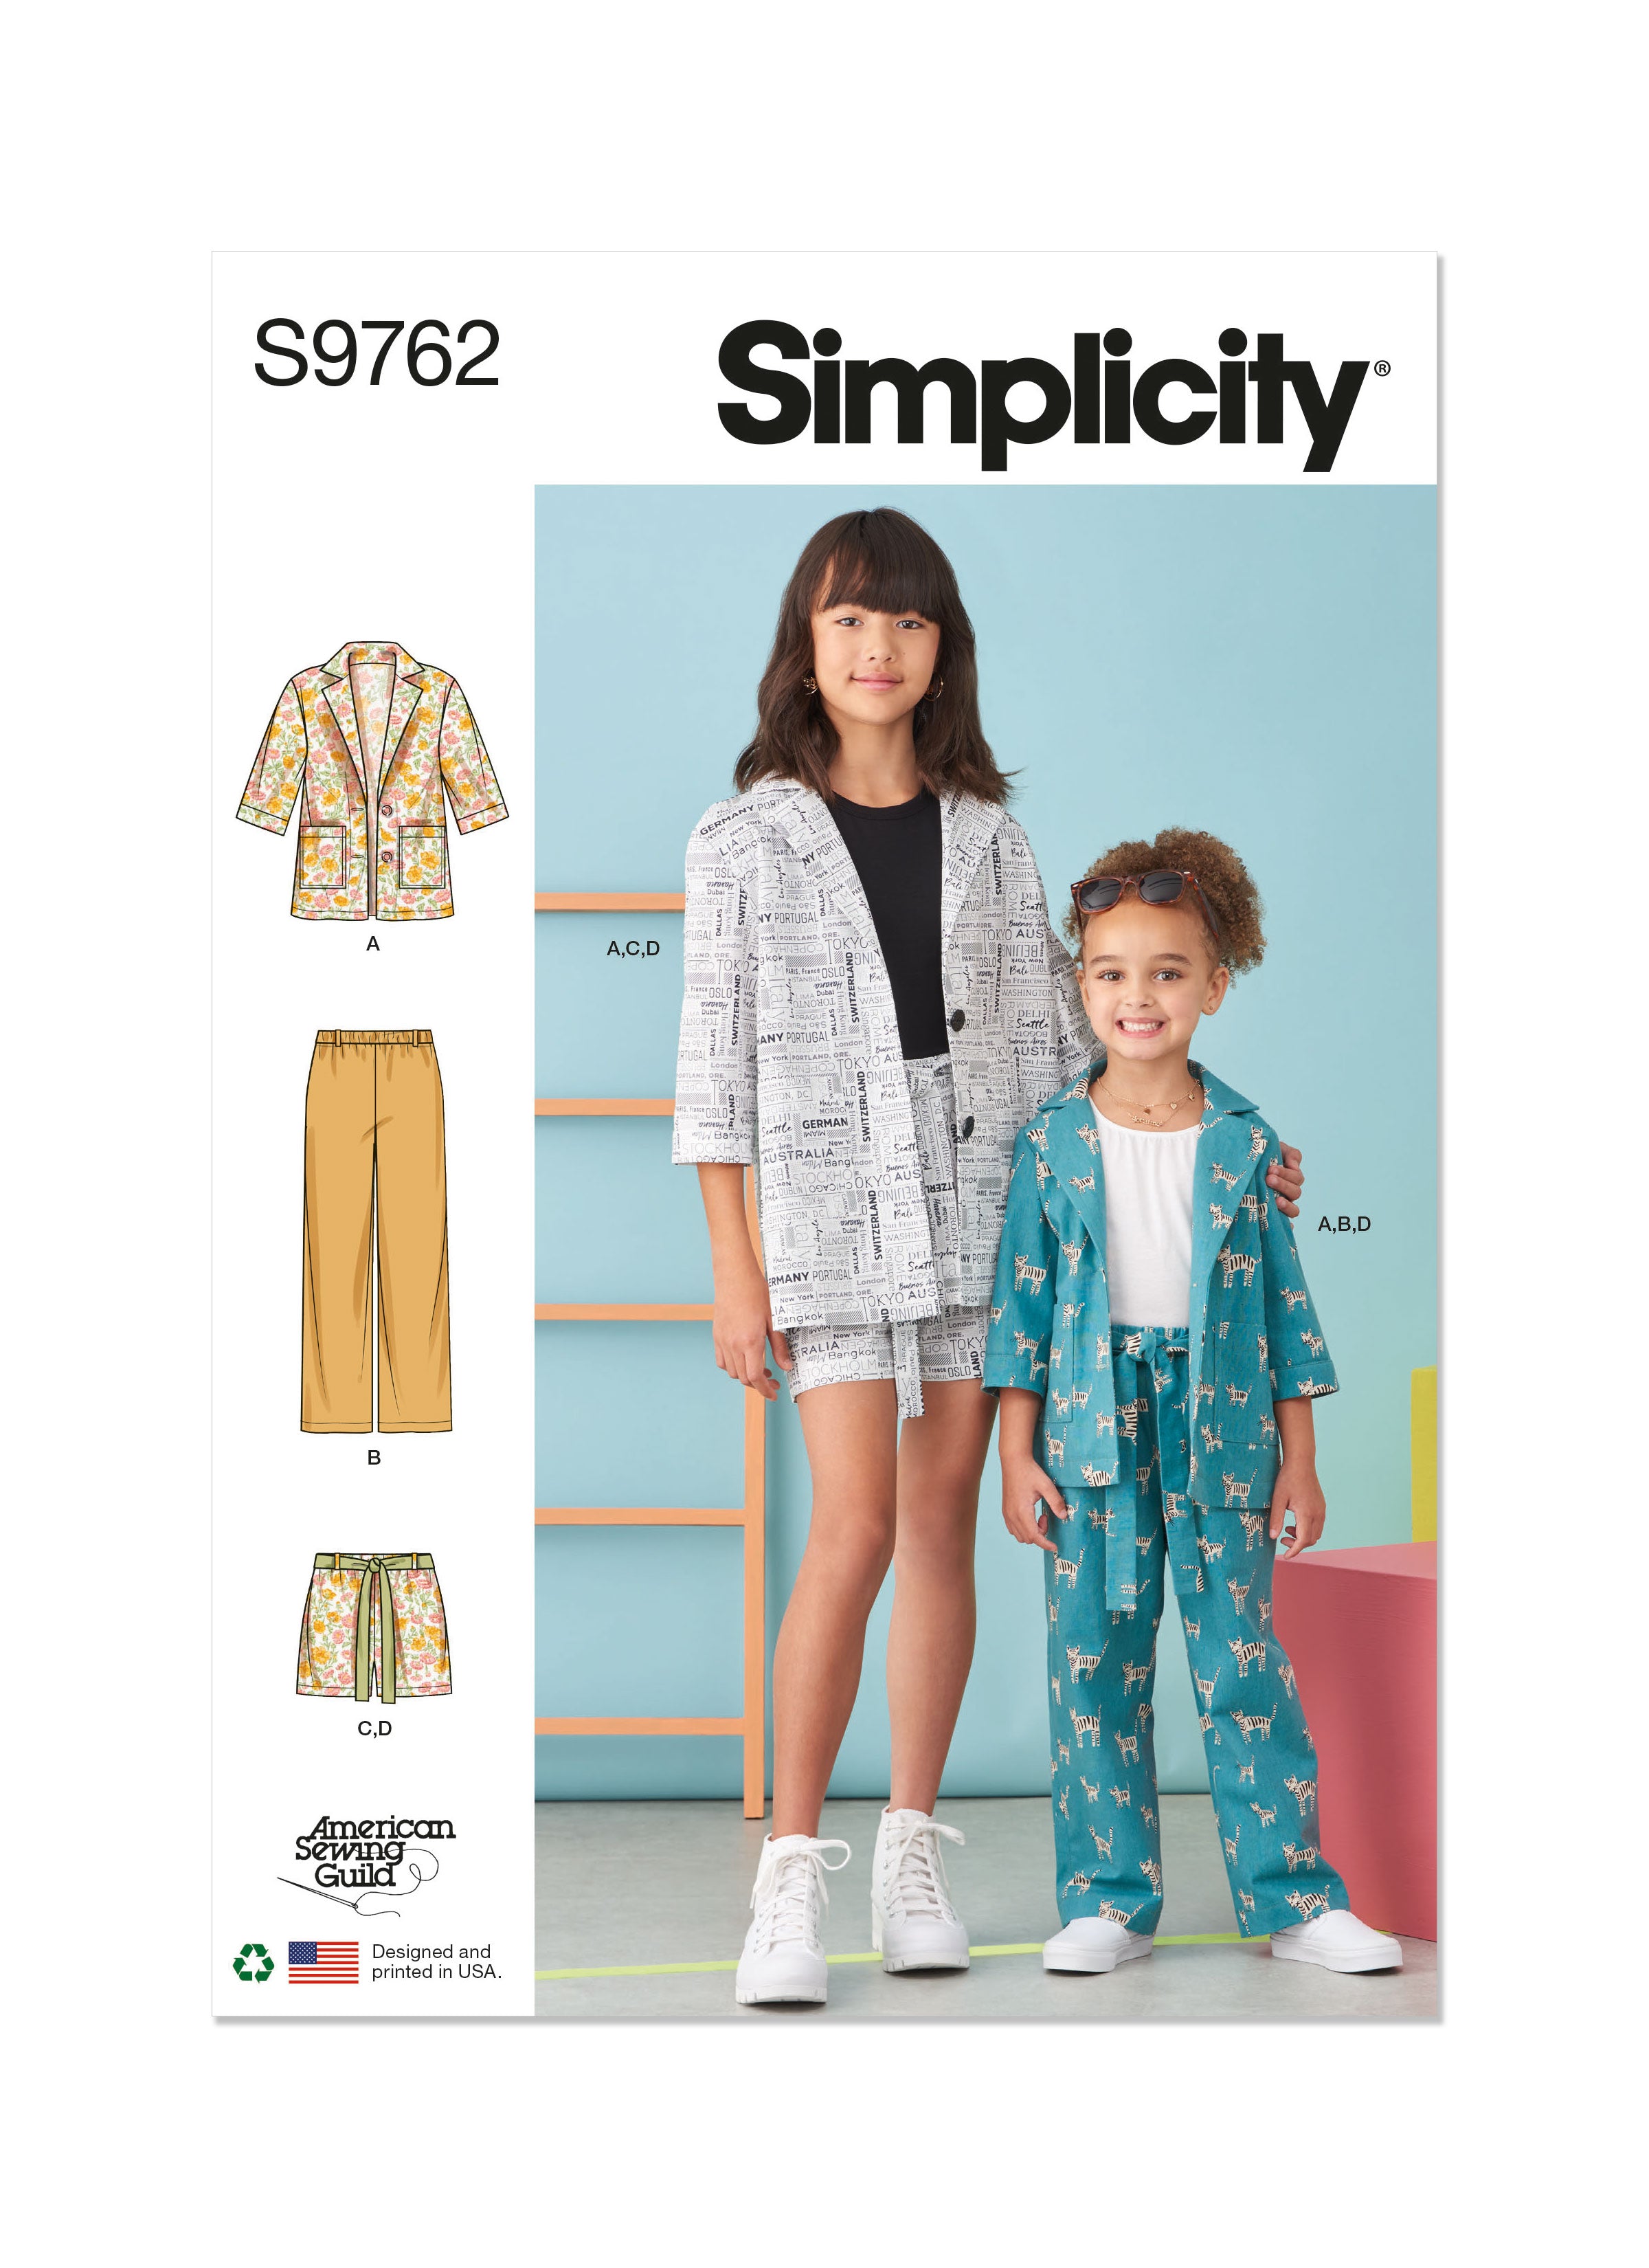 Simplicity 9762 sewing pattern Girls' Jacket, Pants and Shorts for American Sewing Guild from Jaycotts Sewing Supplies